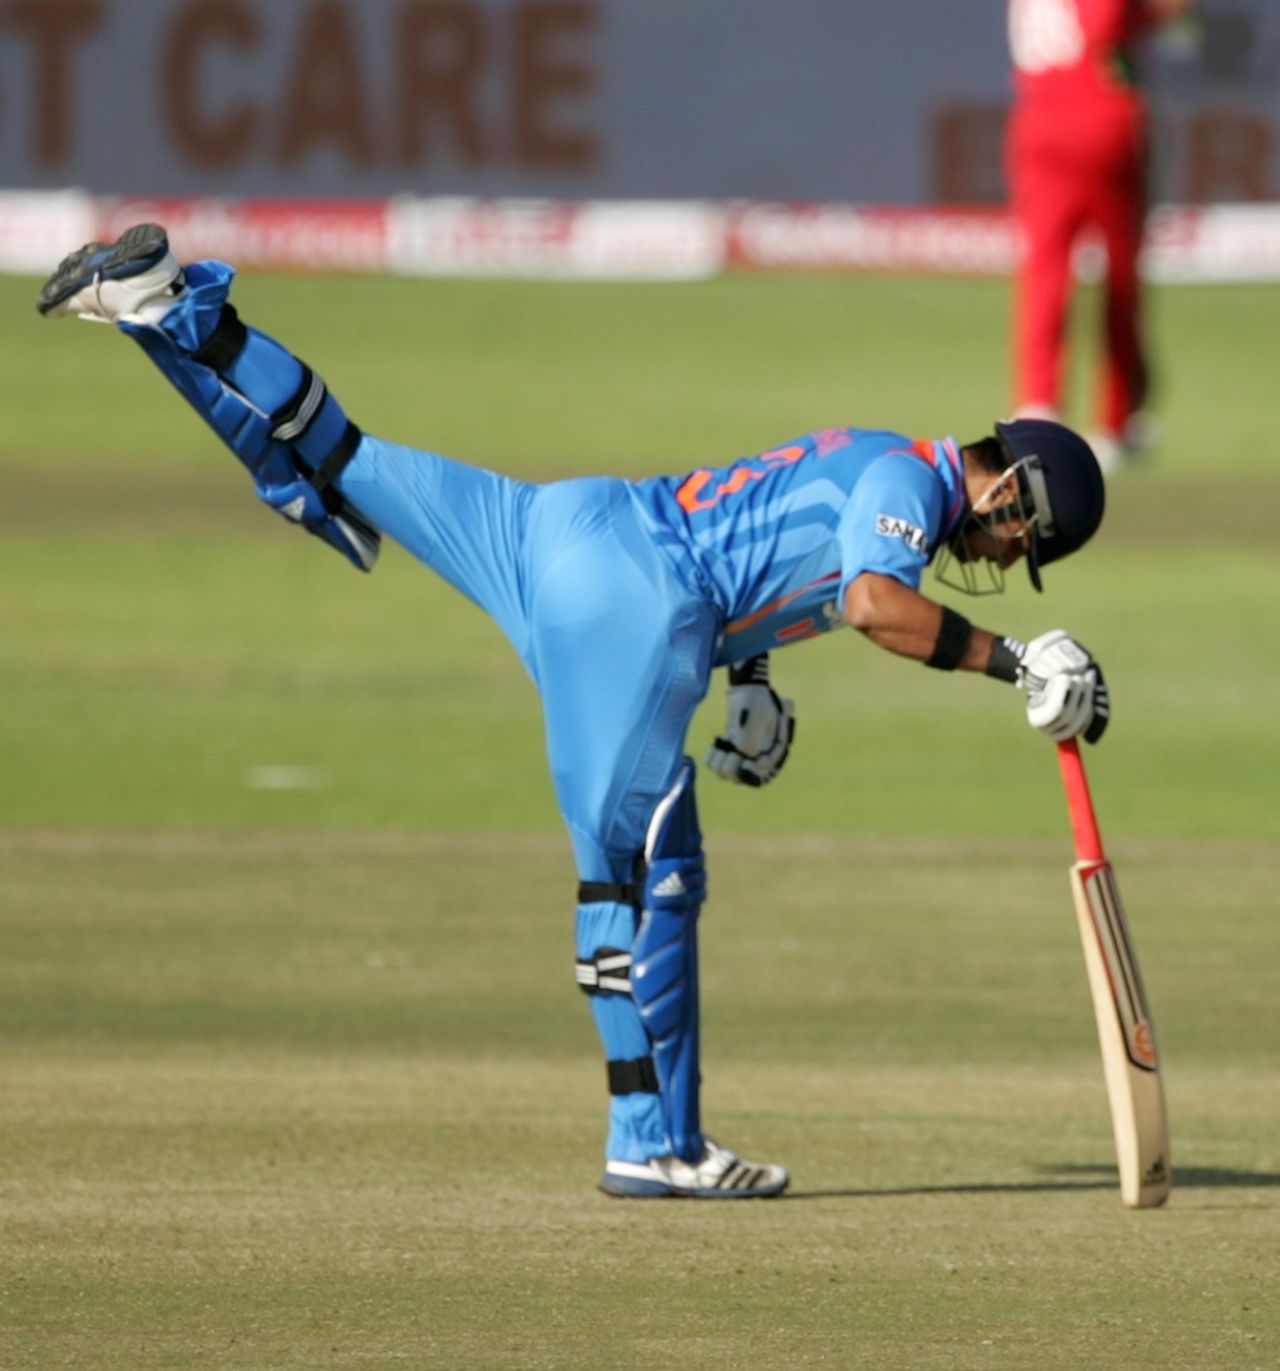 Suresh Raina stretches his muscles before the start of his innings, Zimbabwe v India, 3rd ODI, Harare, July 28, 2013